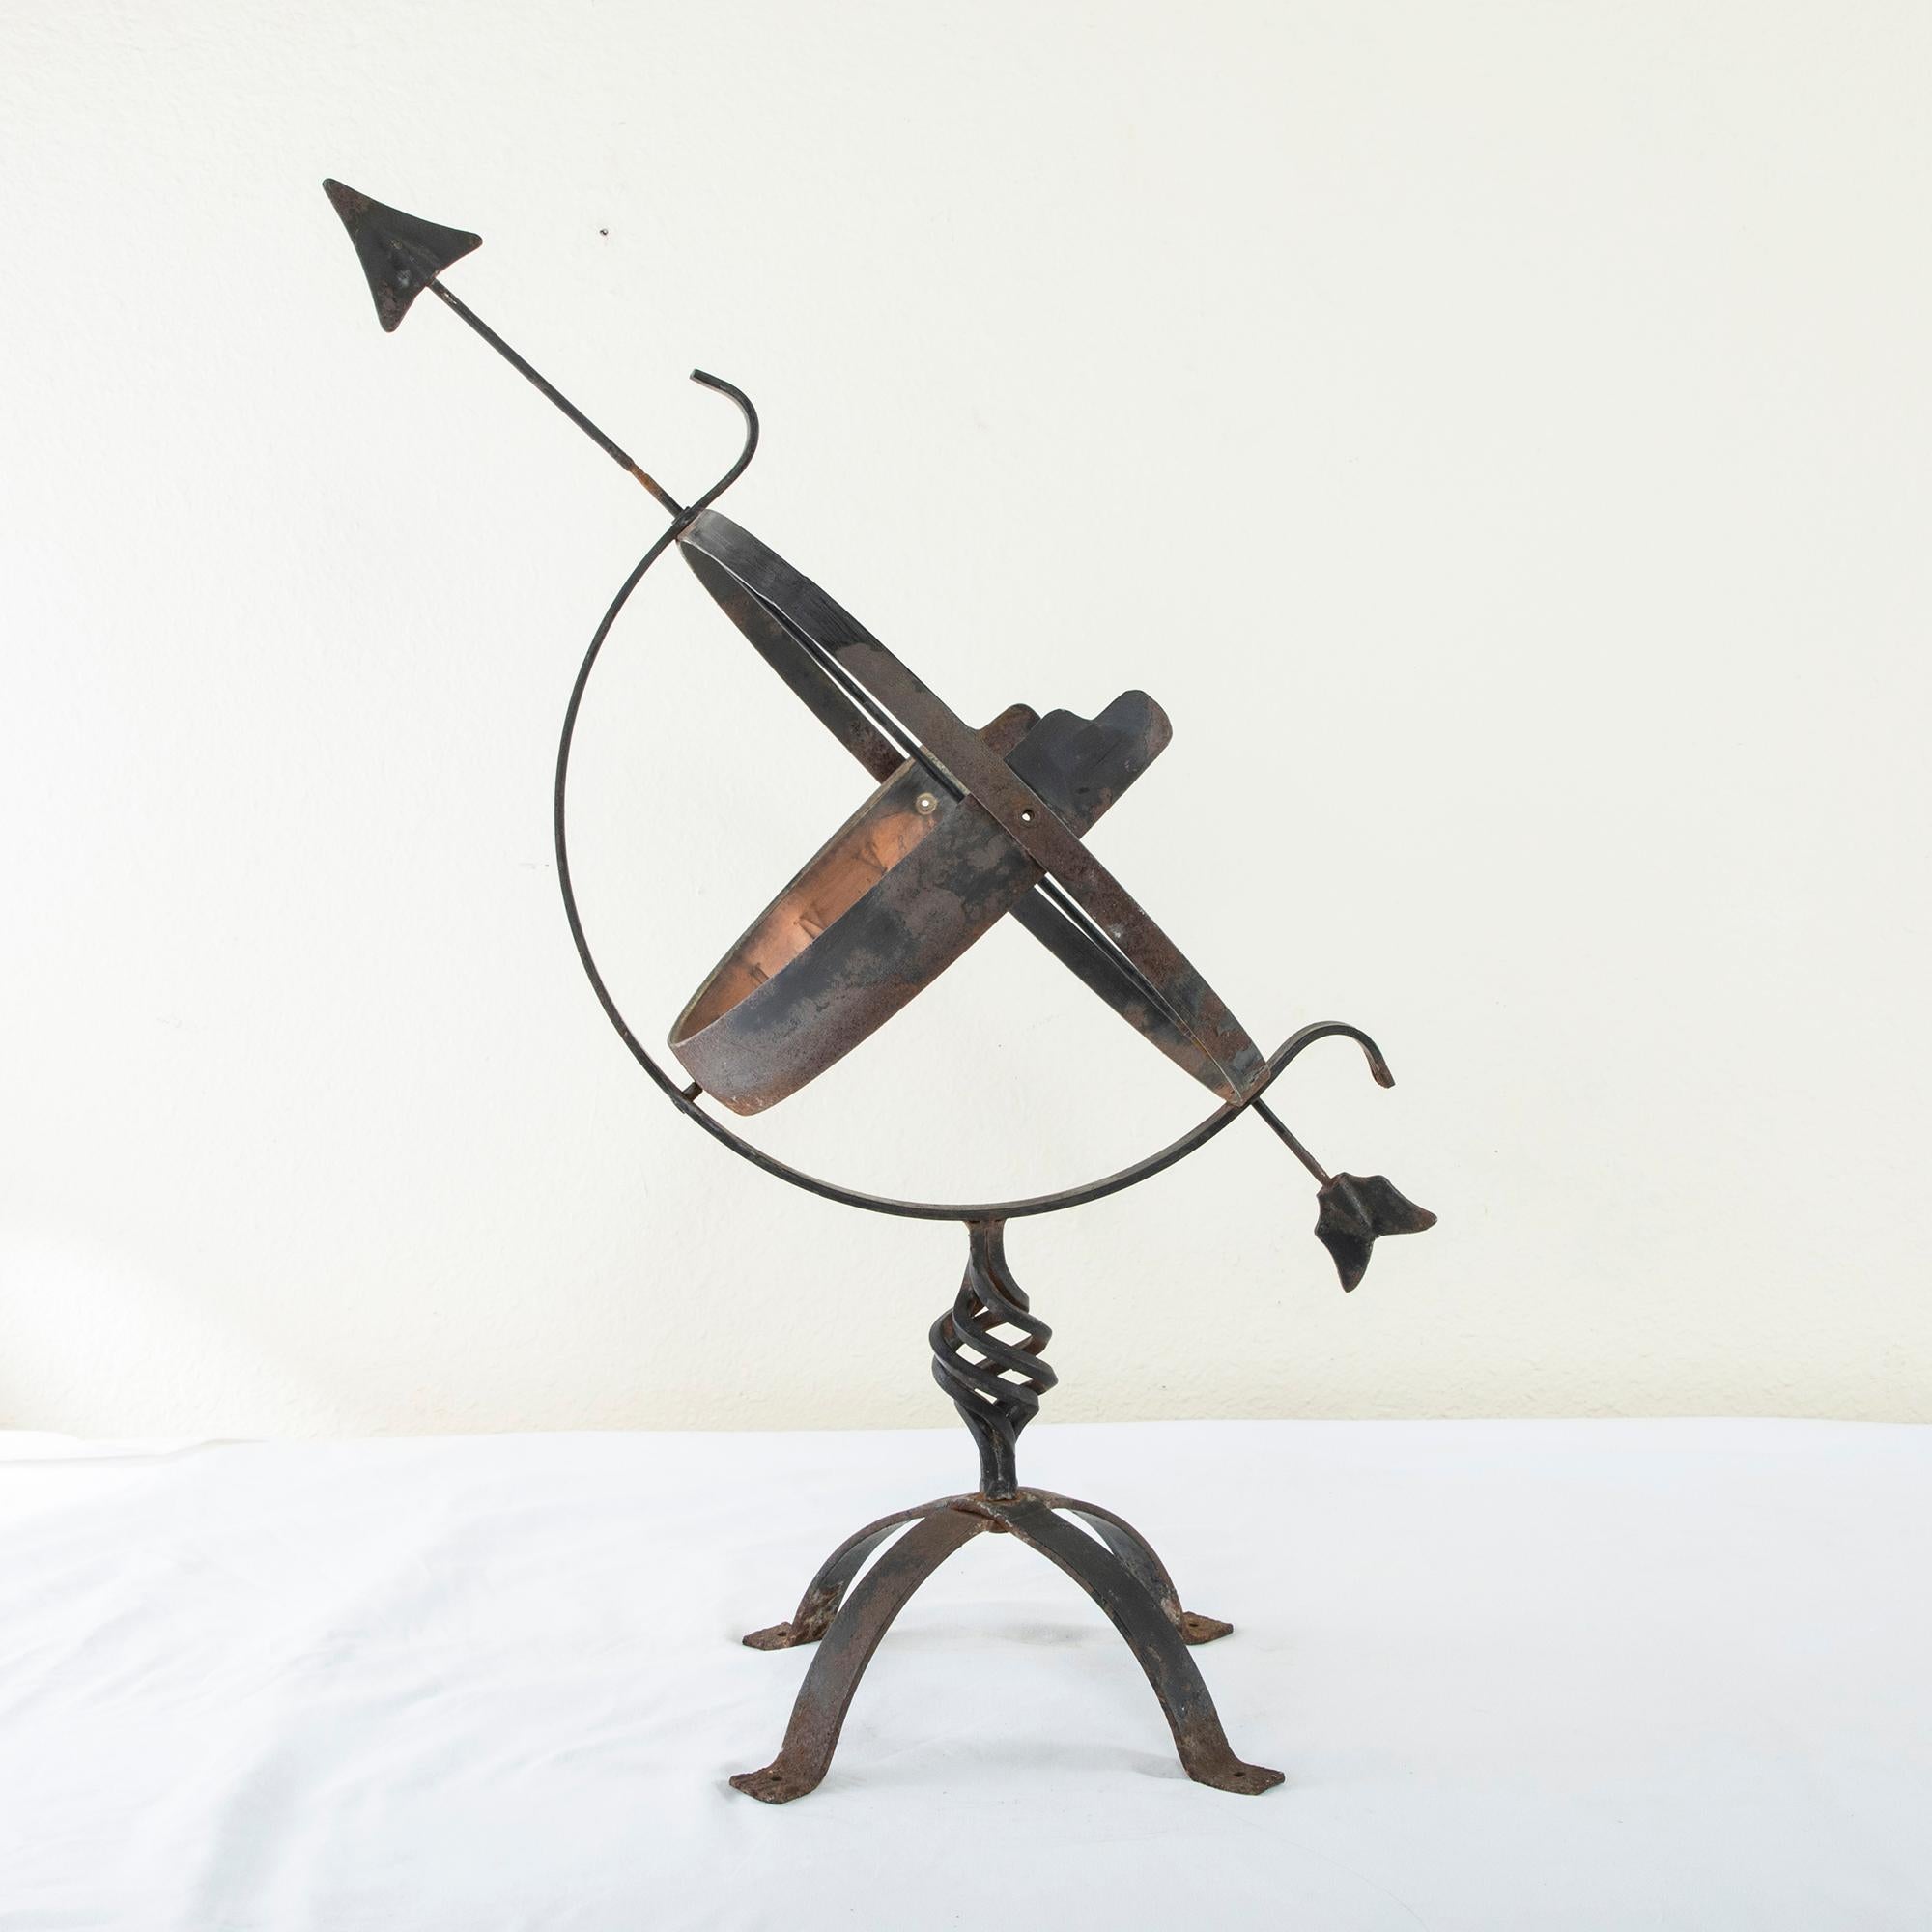 Early 20th Century French Iron and Copper Armillary Sphere or Sundial circa 1900